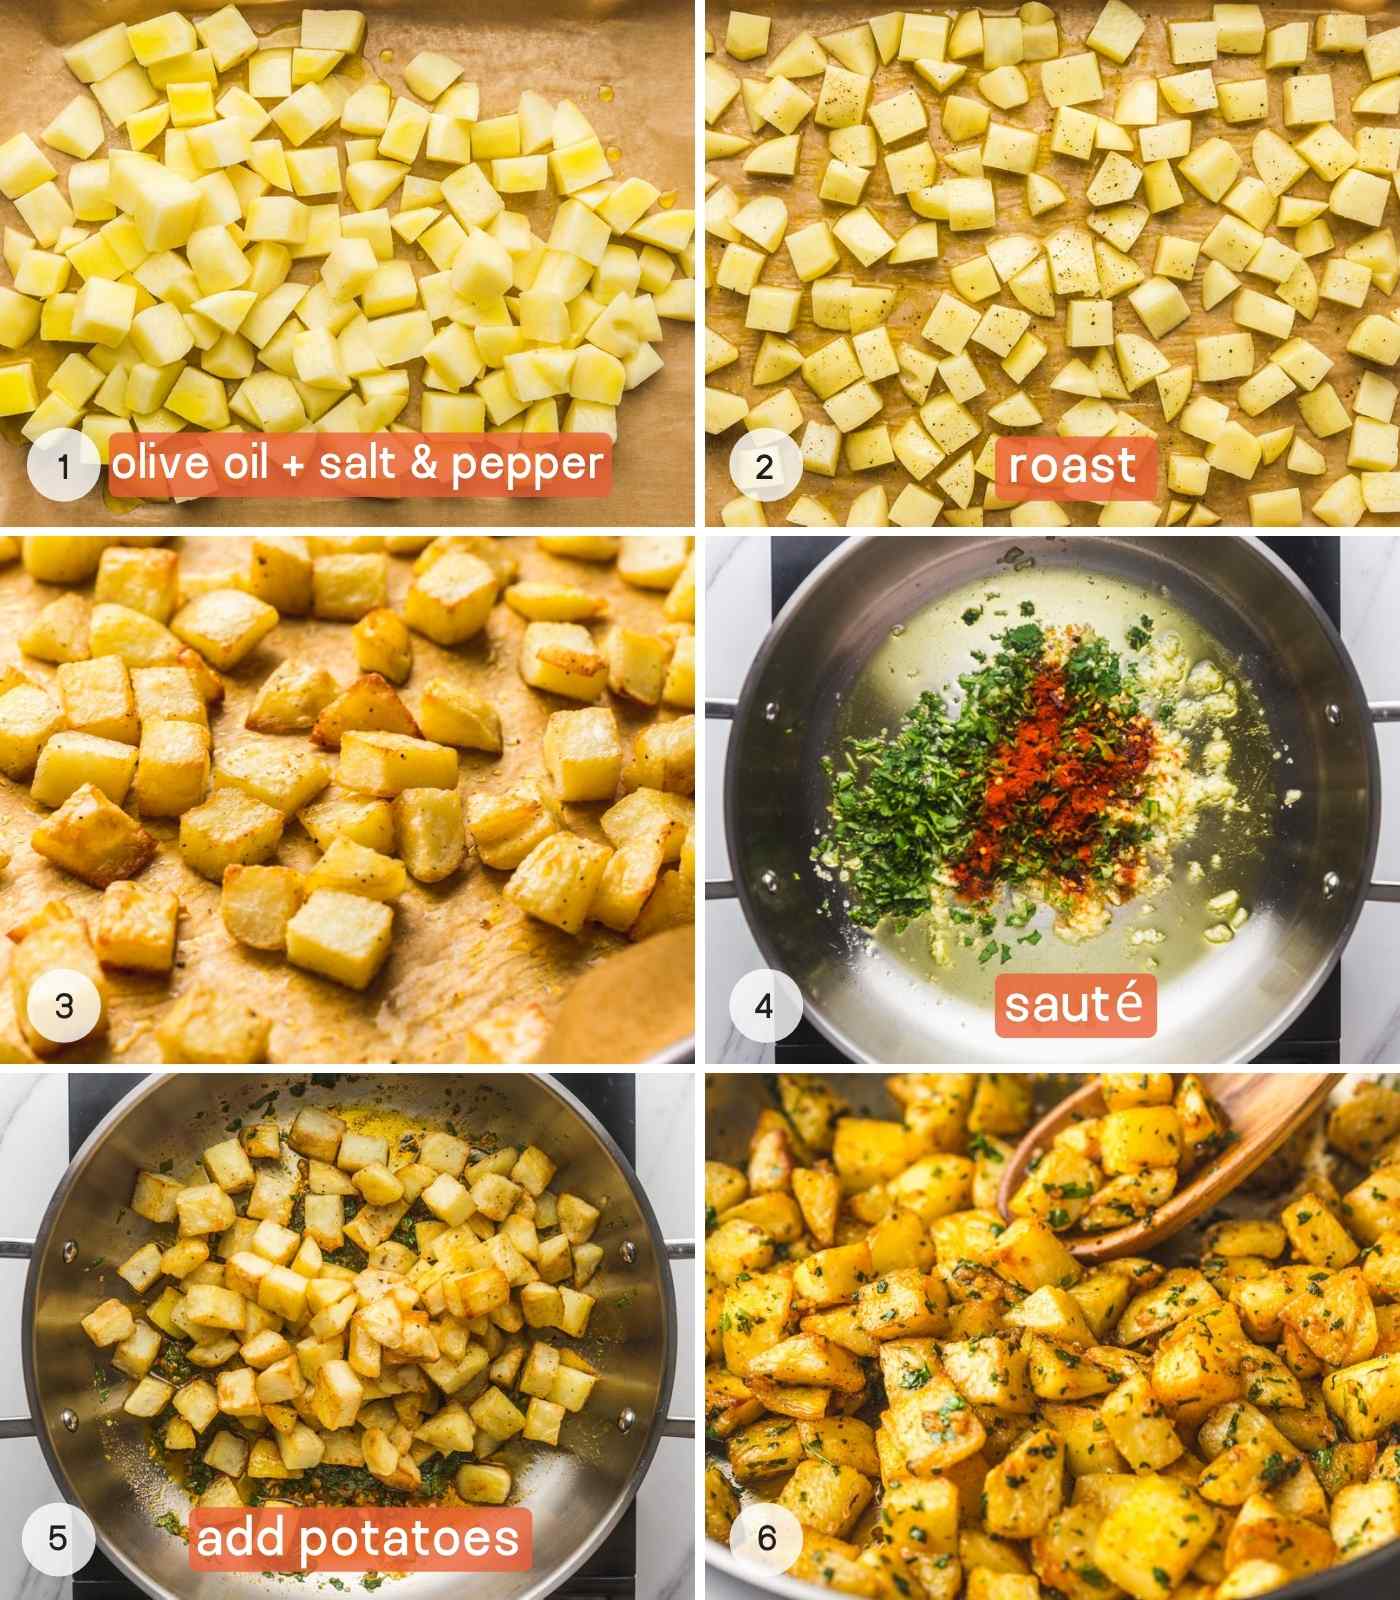 A collage showing steps how to make batata harra, total of 6 images